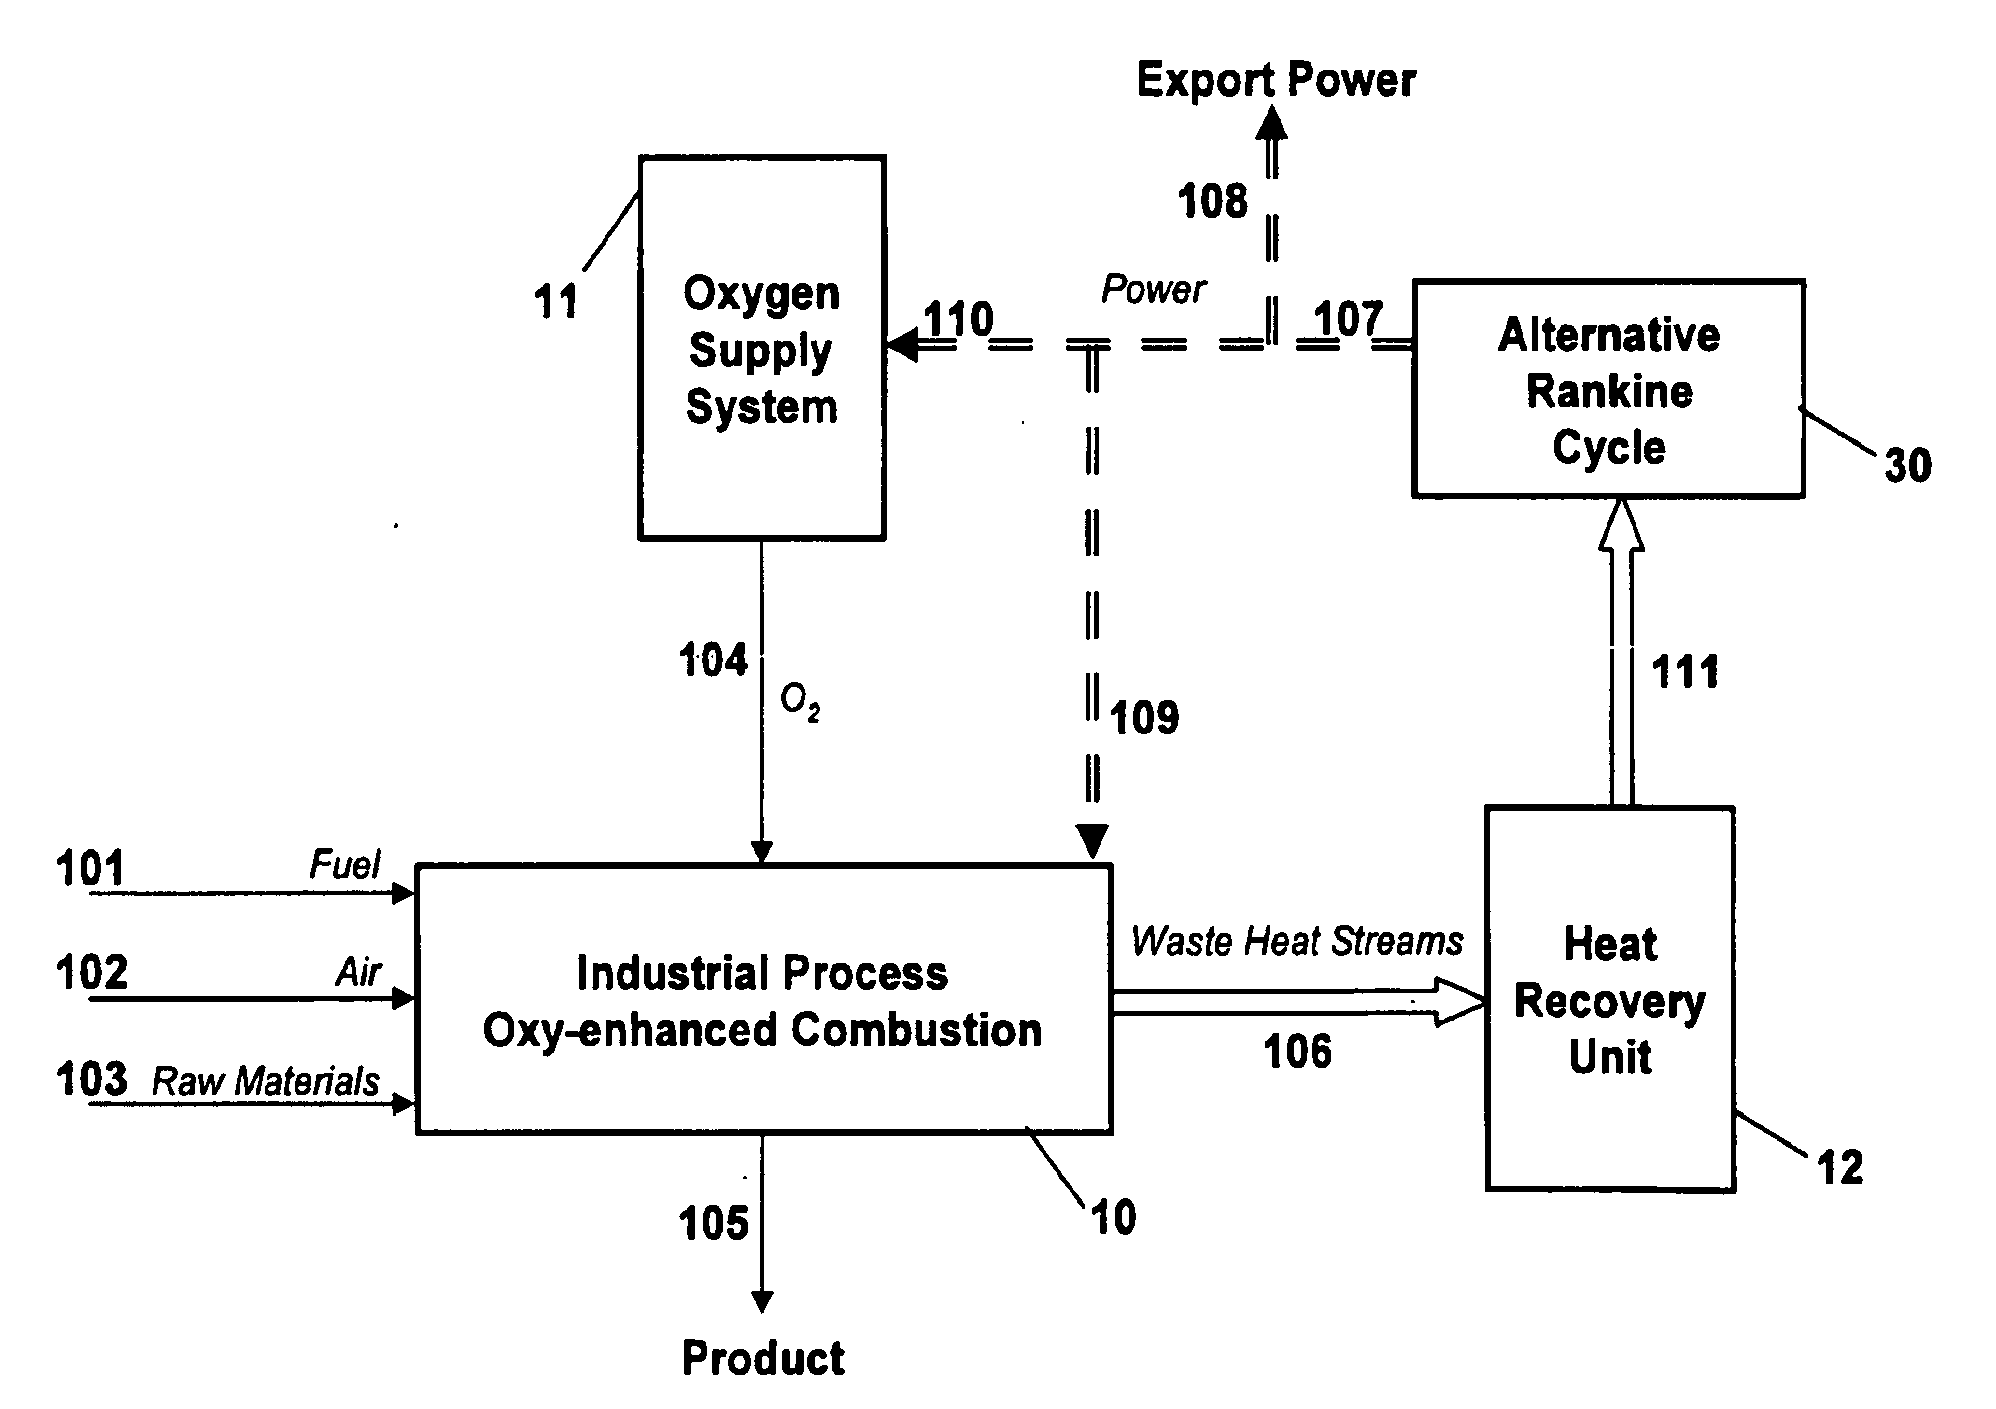 Oxygen enhanced combustion in industrial processes